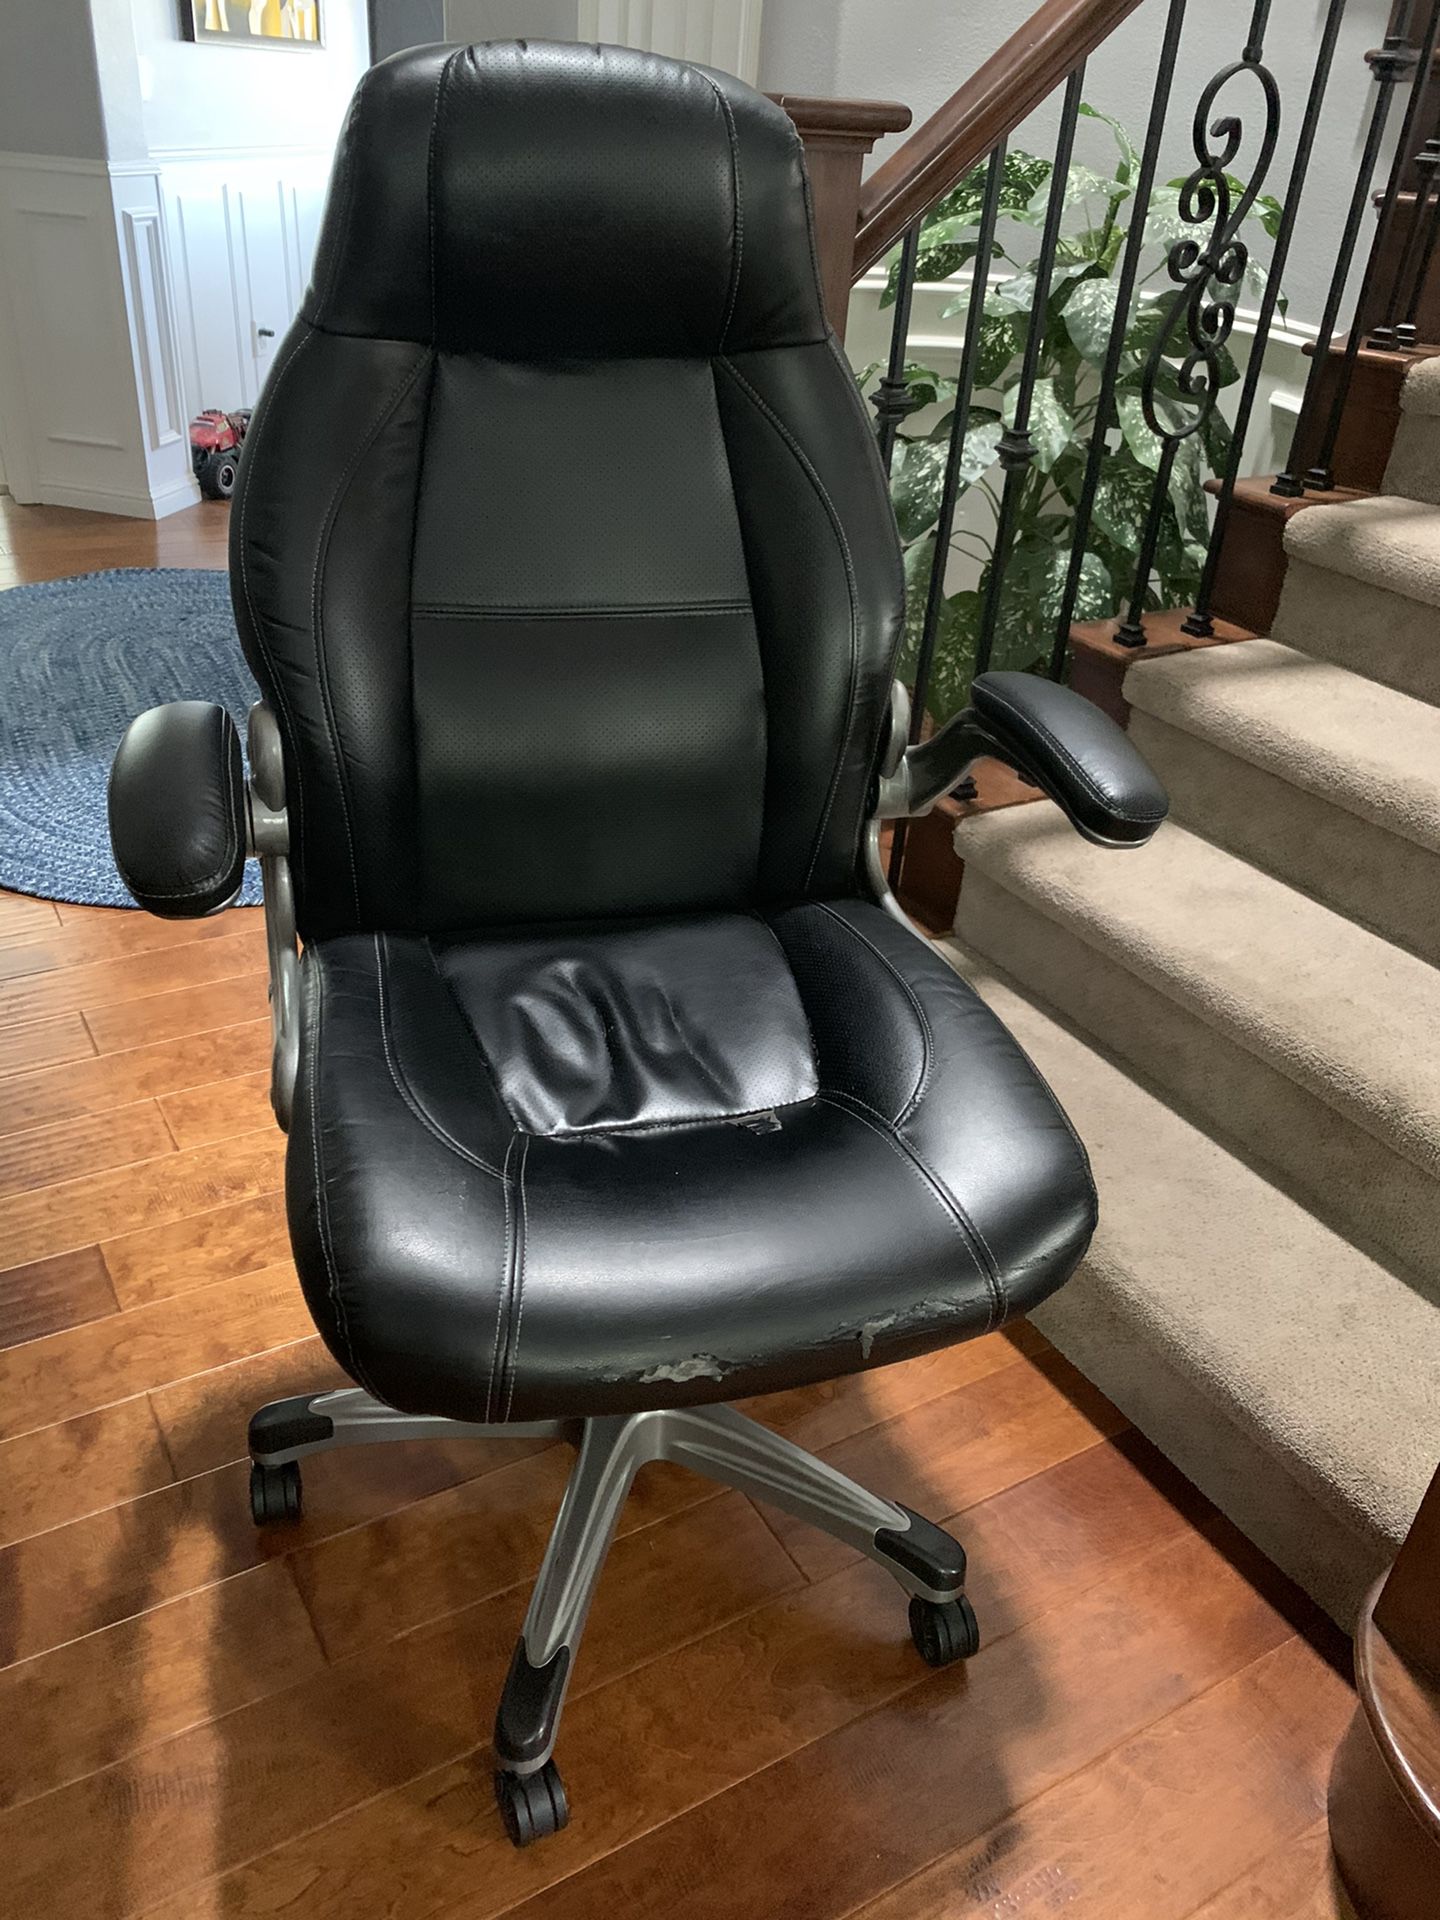 Now pending pickup...FREE office chair